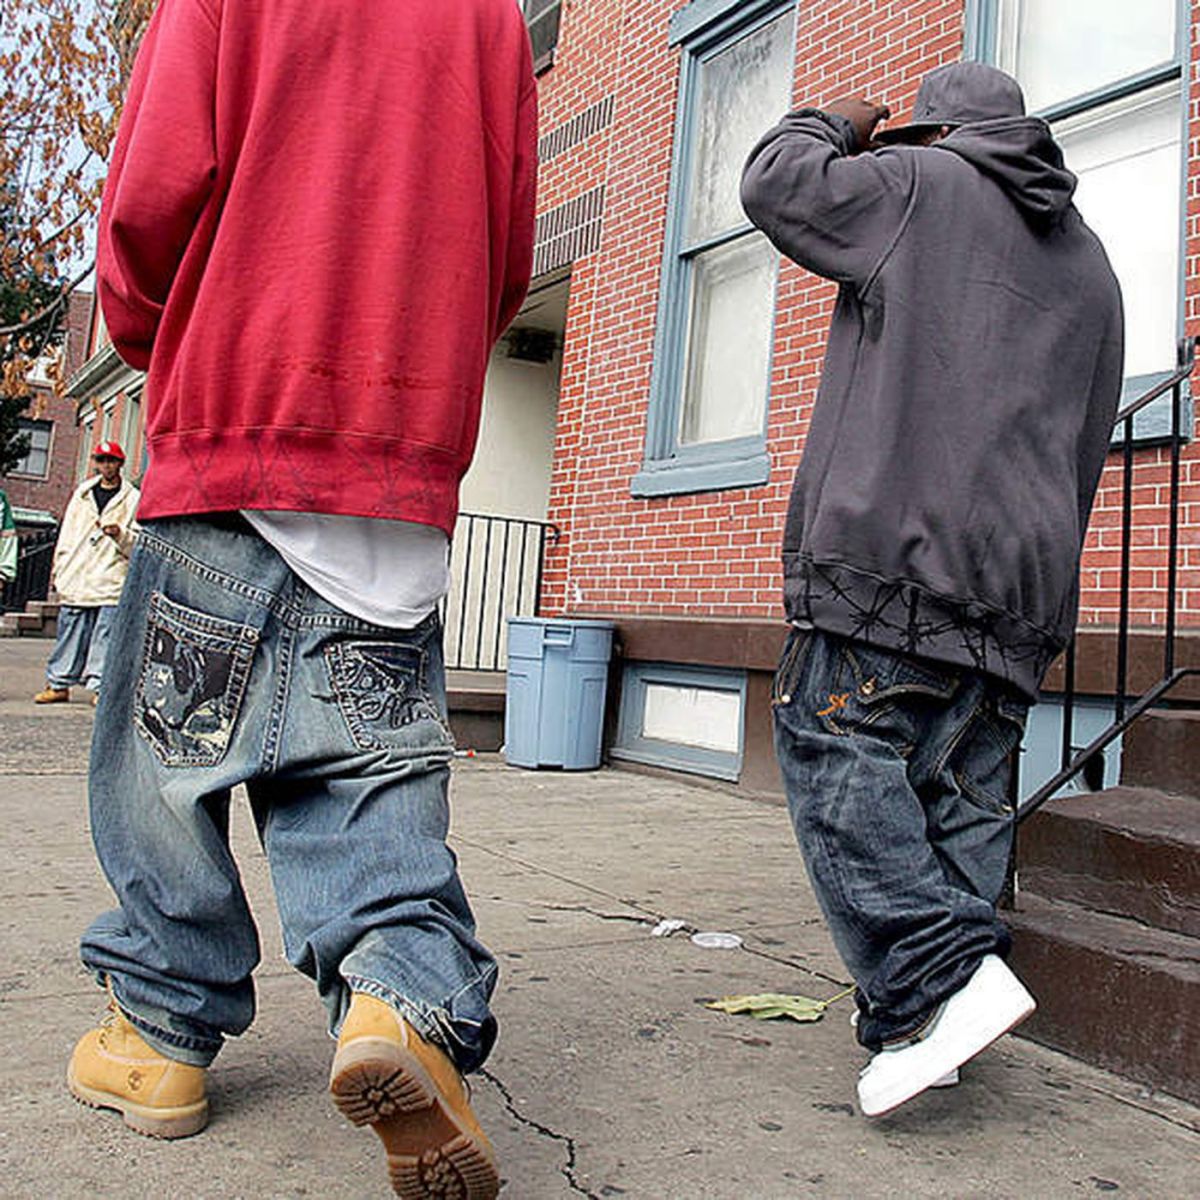 Sagging Pants Trend Came From Sexual Abuse of Black Men During